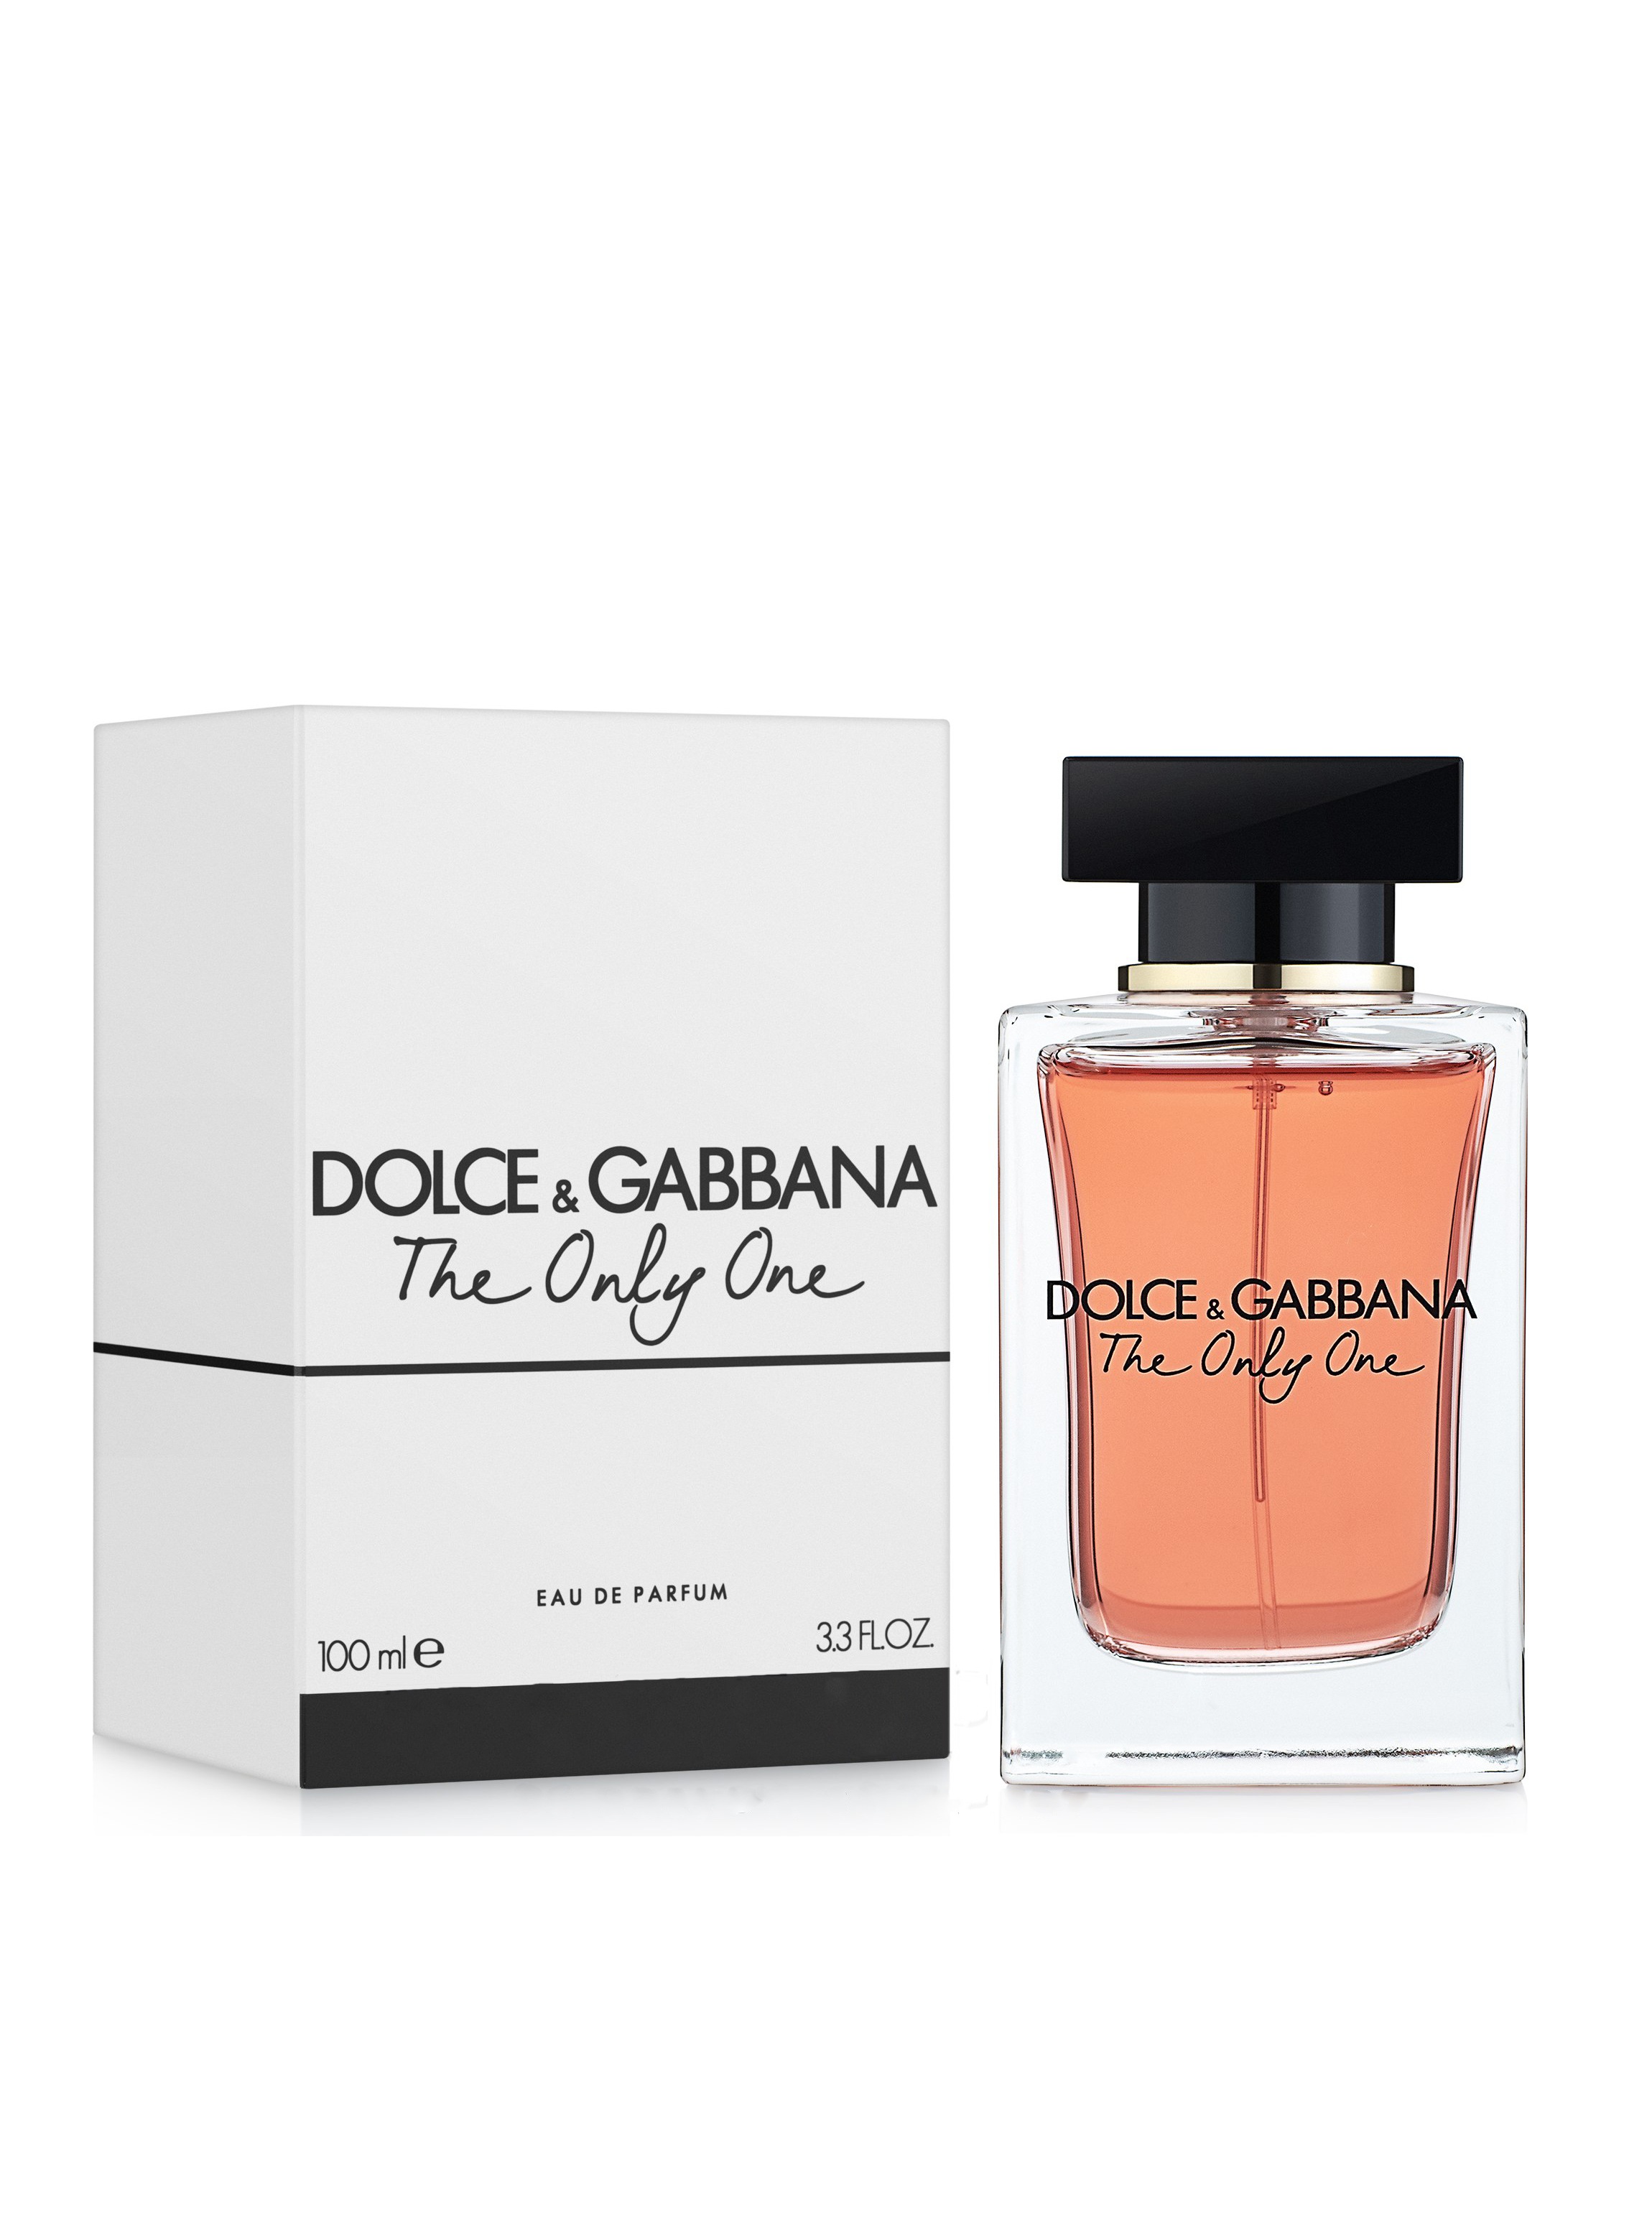 Духи dolce only one. Dolce & Gabbana the only one, EDP., 100 ml. Dolce& Gabbana the only one 2 EDP, 100 ml. Dolce Gabbana the only one 100ml. Dolce & Gabbana the only one 100 мл.